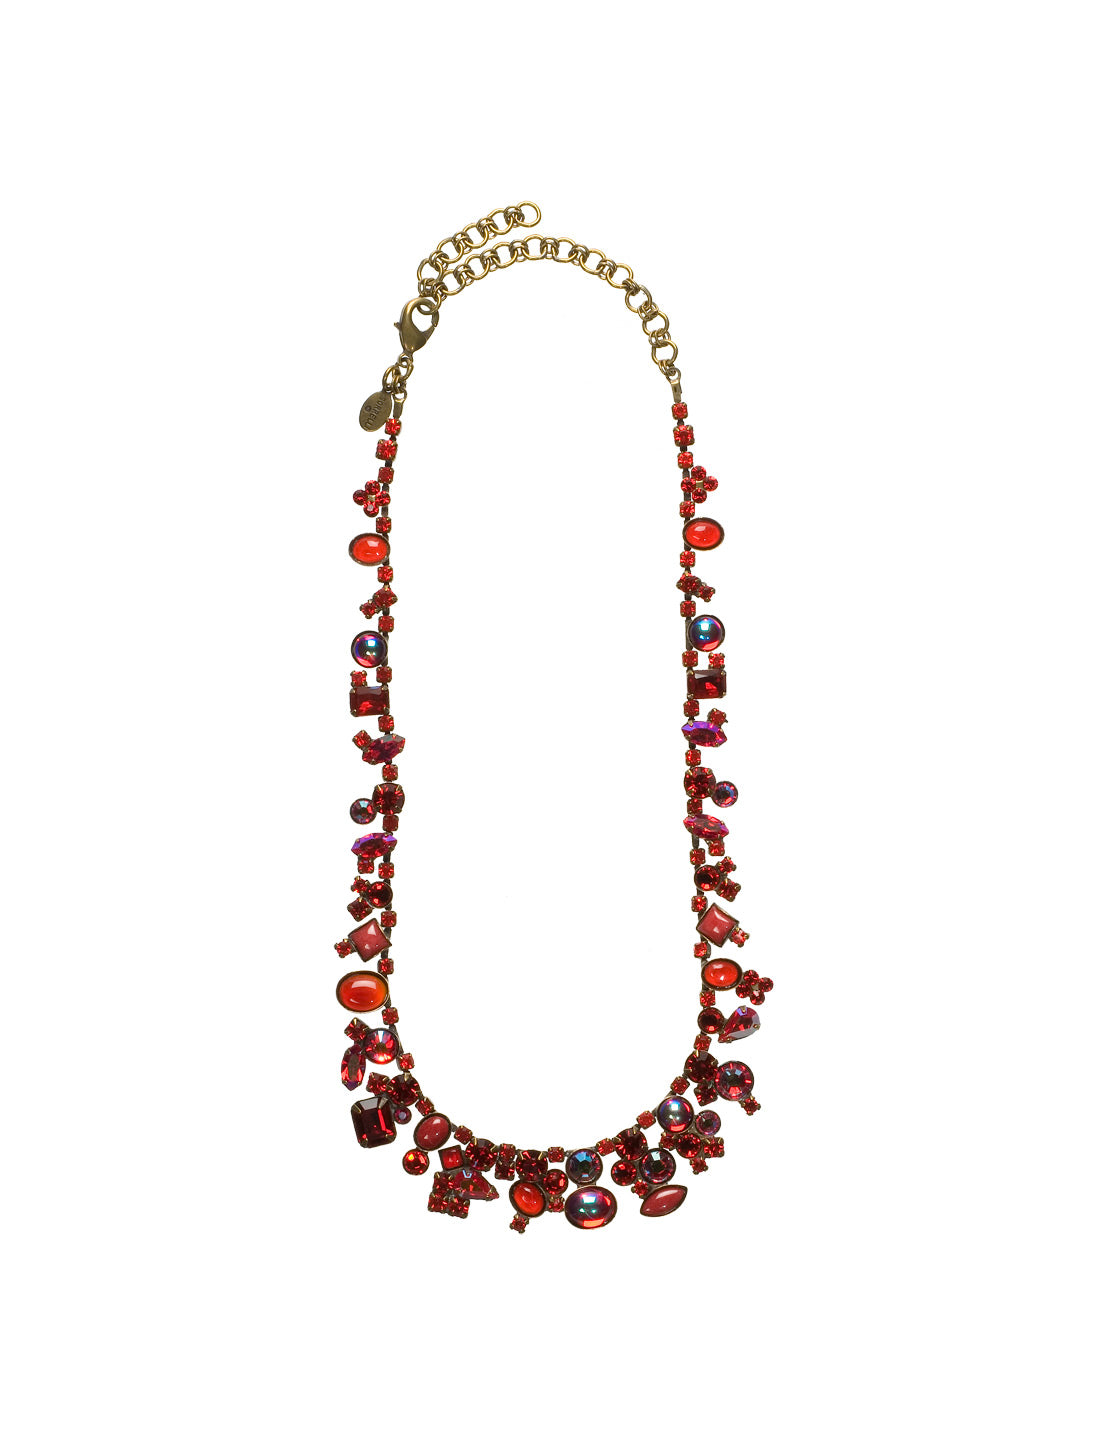 Colette Tennis Necklace - NAX8AGCB - classic necklace From Sorrelli's Cranberry collection in our Antique Gold-tone finish.